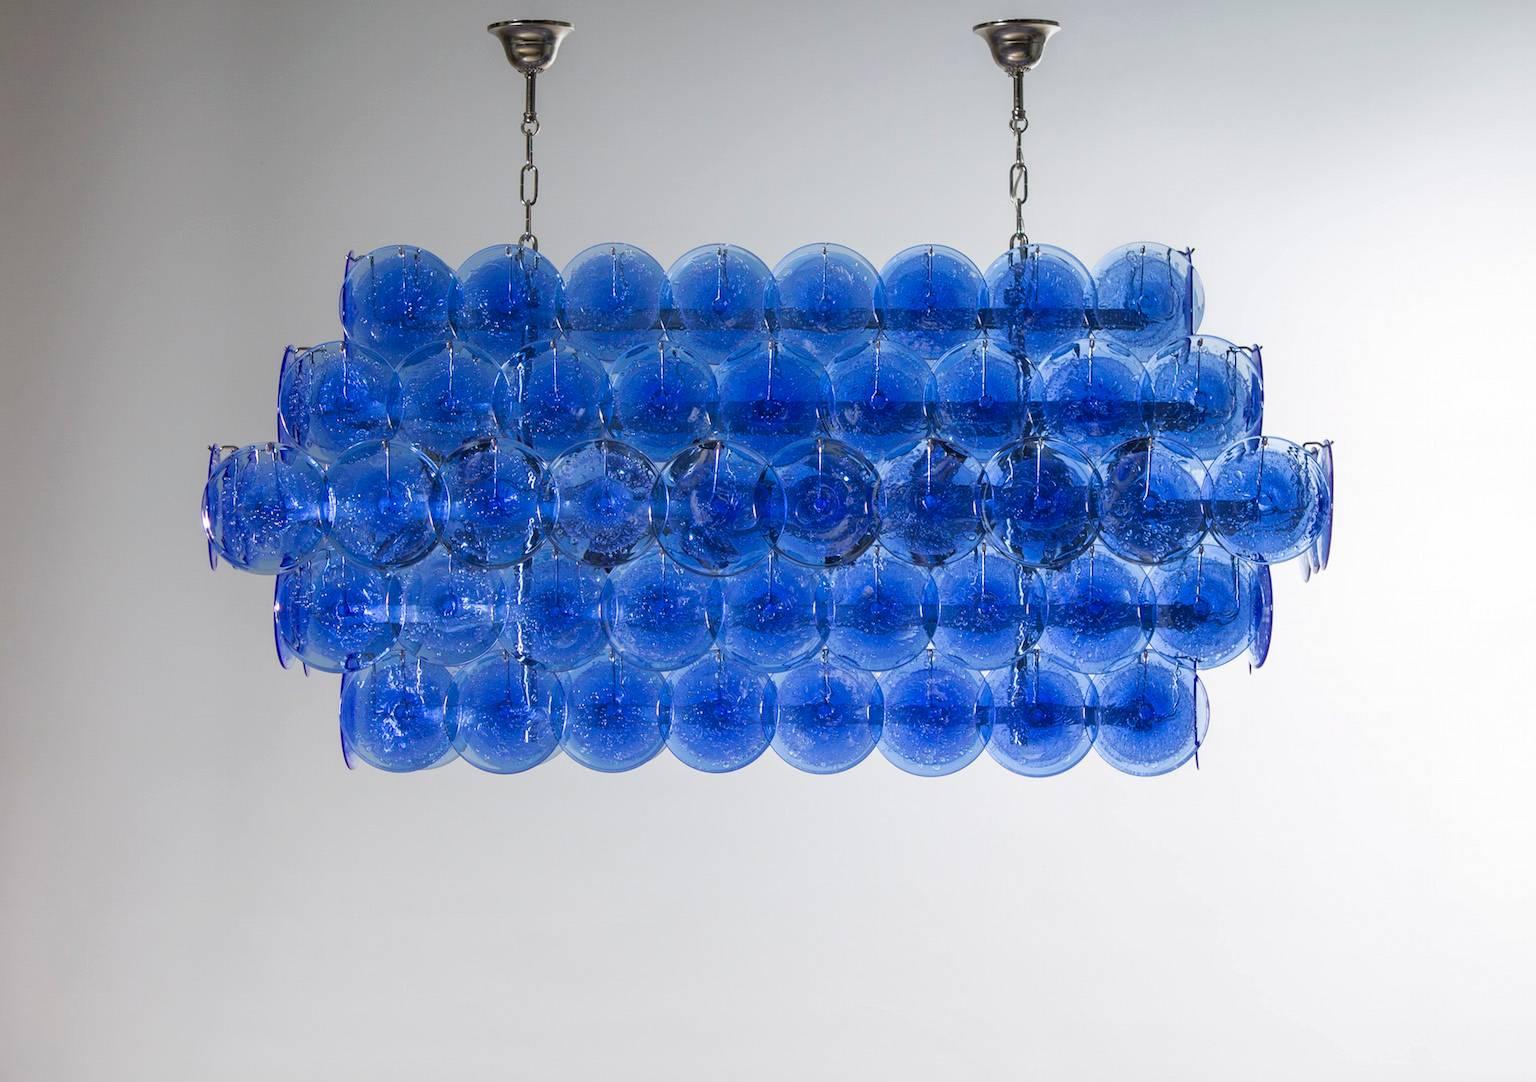 Amazing and spectacular Italian Murano chandelier, attributed to Mazzega, circa 1980s, composed by circular elements in blue color with in the center bubbles submerged, all is supported by a chrome frame. The chandelier is 26 inches high without